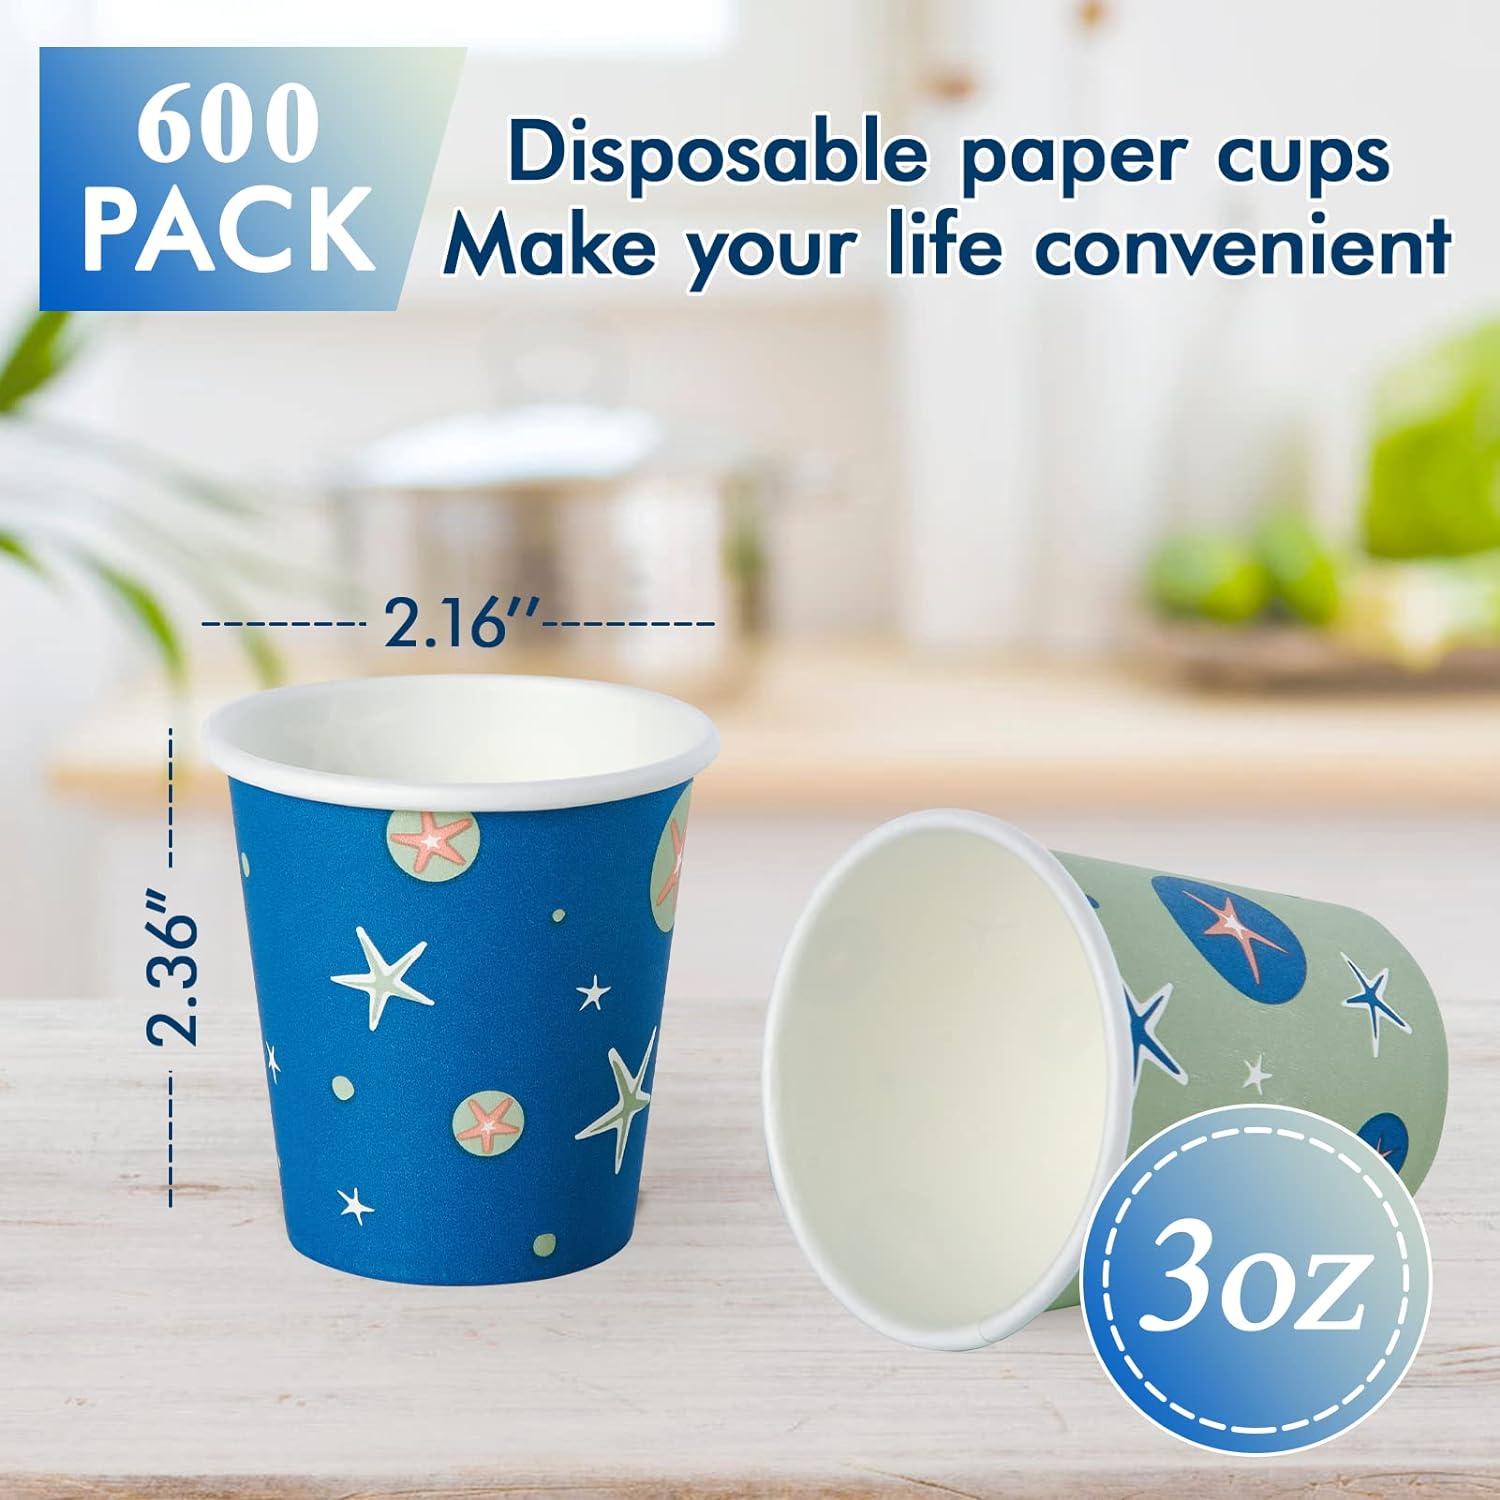 TV TOPVALUE 600pack 3oz Disposable Paper Cups Colorful Paper Bathroom Cups  Small Mouthwash Cups Espresso Cups Snack Cups for Party Picnic Travel and  Events 3OZ-Green and Blue